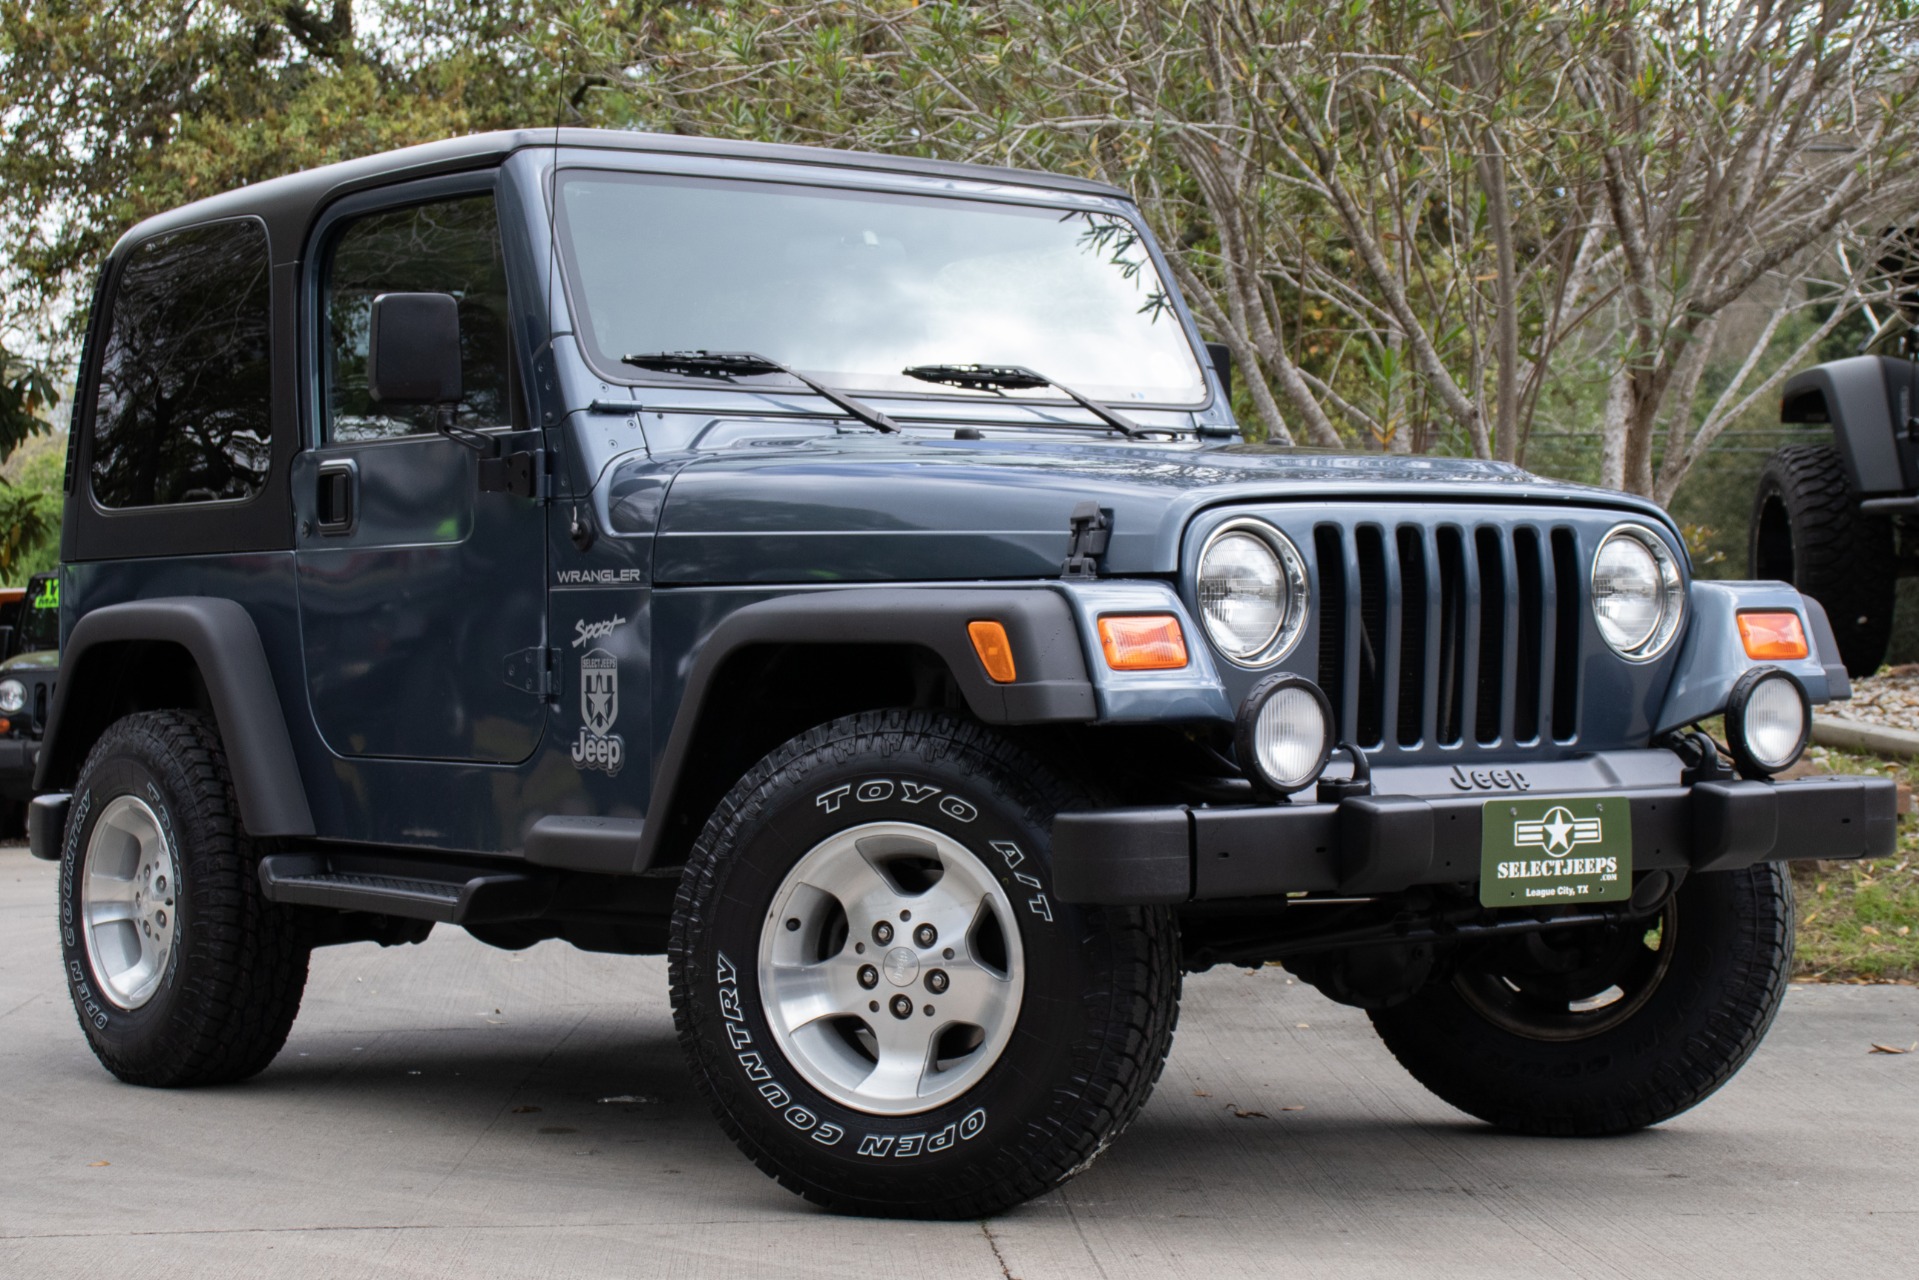 Used 2002 Jeep Wrangler Sport For Sale ($23,995) | Select Jeeps Inc. Stock  #707190